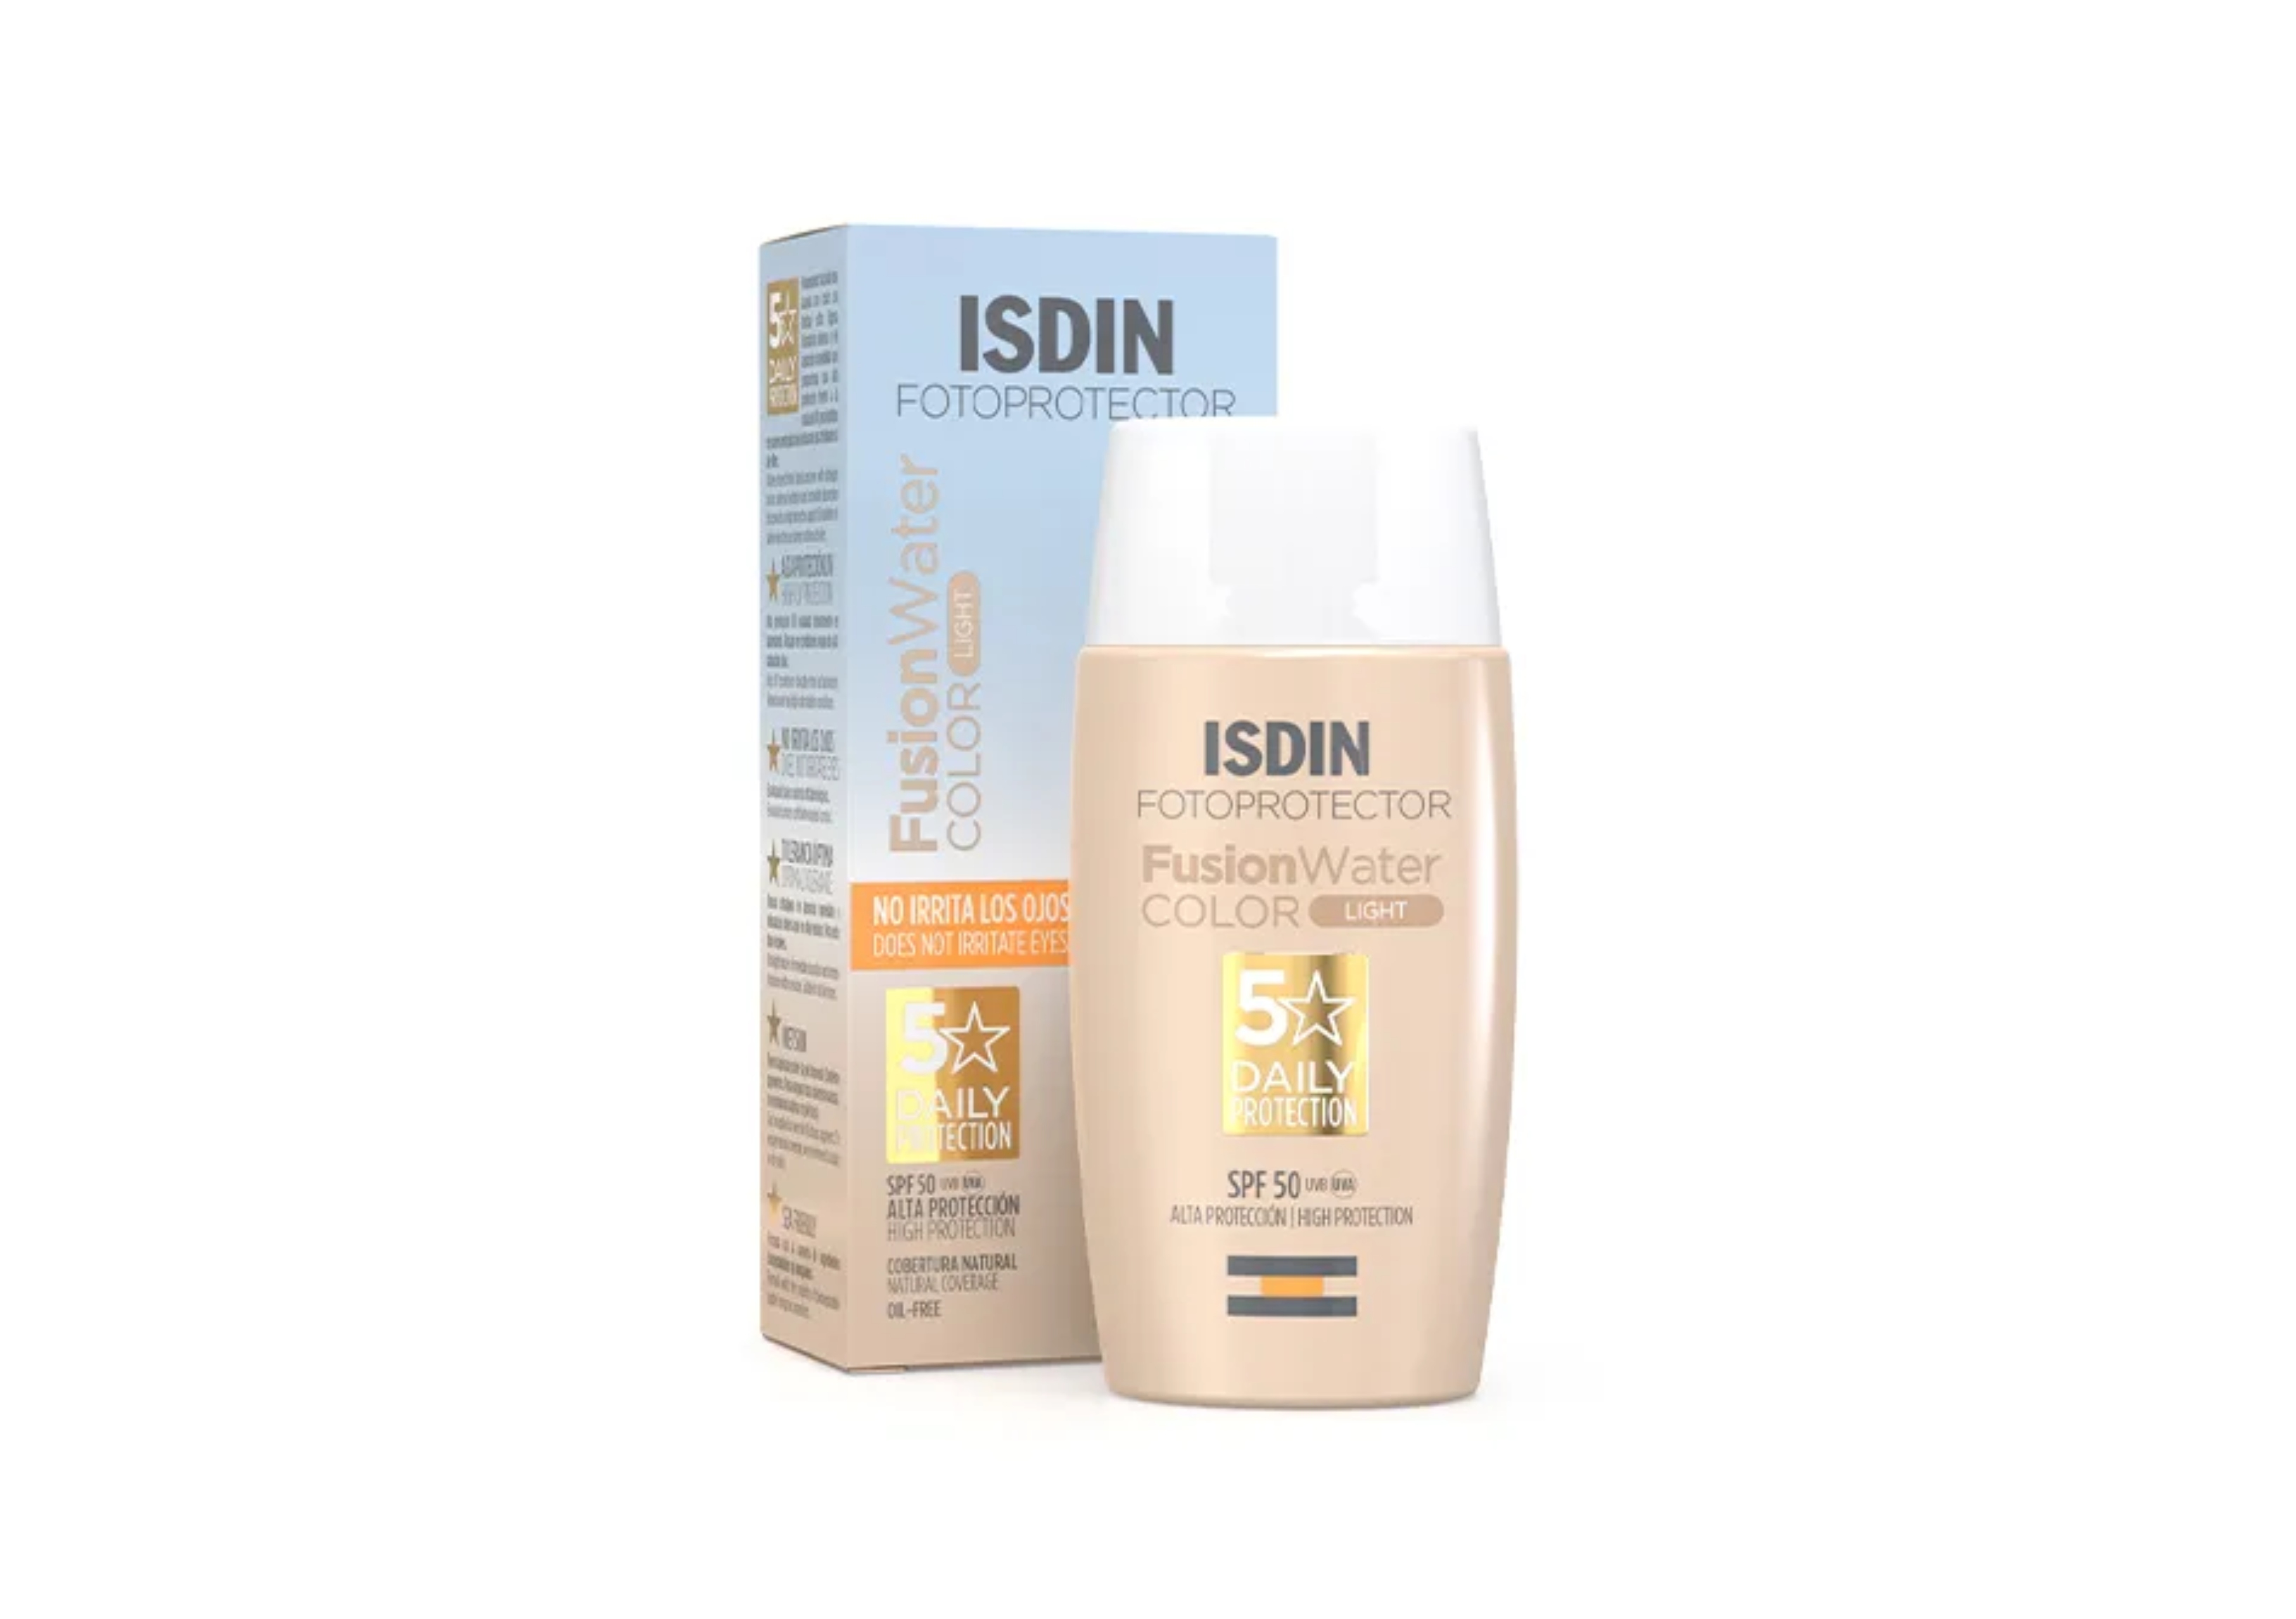 Sunscreen 'Fusion Water Color SPF50' from ISDIN